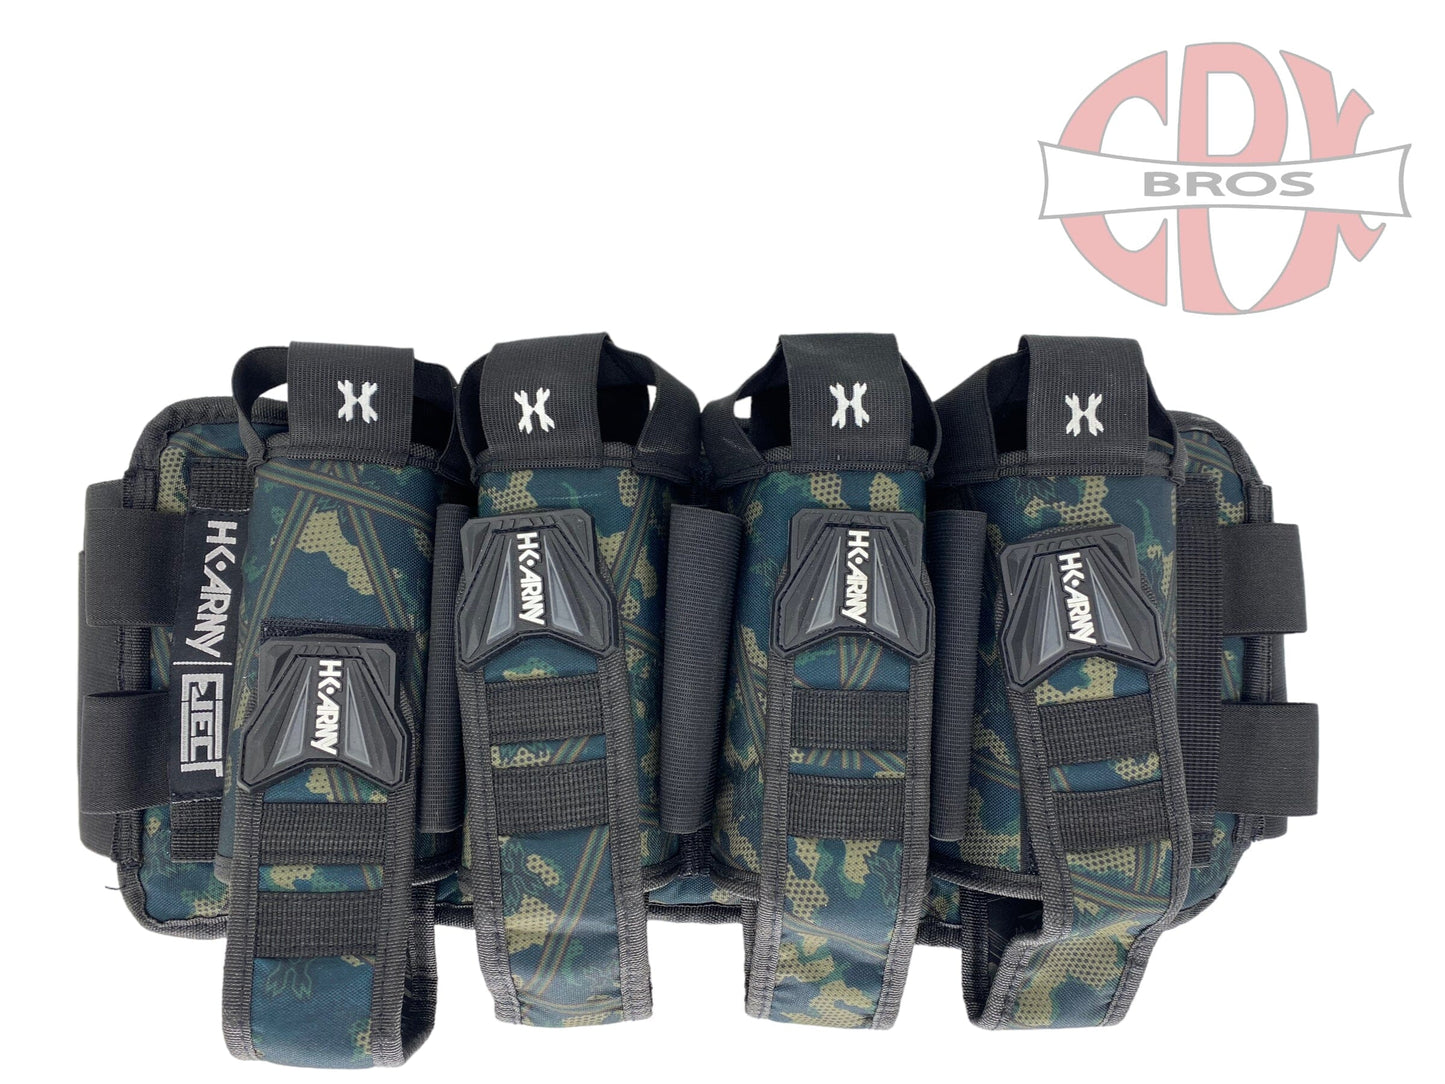 Used Hk Army Eject Paintball Pod Pack Paintball Gun from CPXBrosPaintball Buy/Sell/Trade Paintball Markers, Paintball Hoppers, Paintball Masks, and Hormesis Headbands